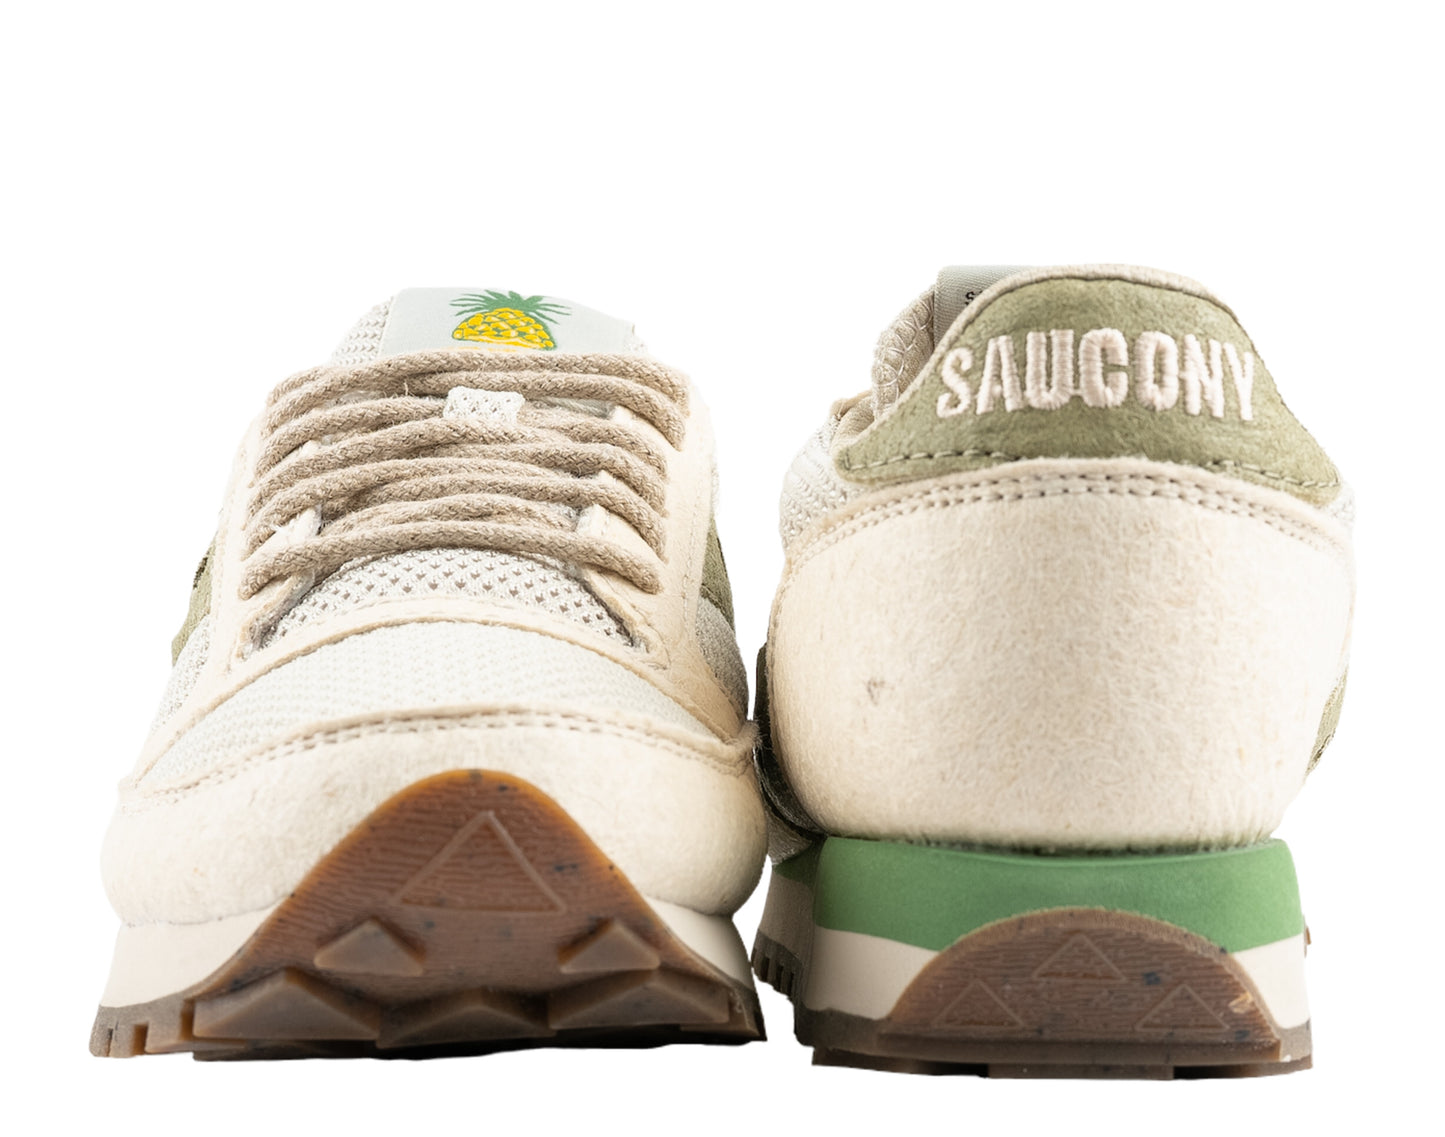 Saucony Originals Jazz 81 - Earth Pack RFG - Running Shoes